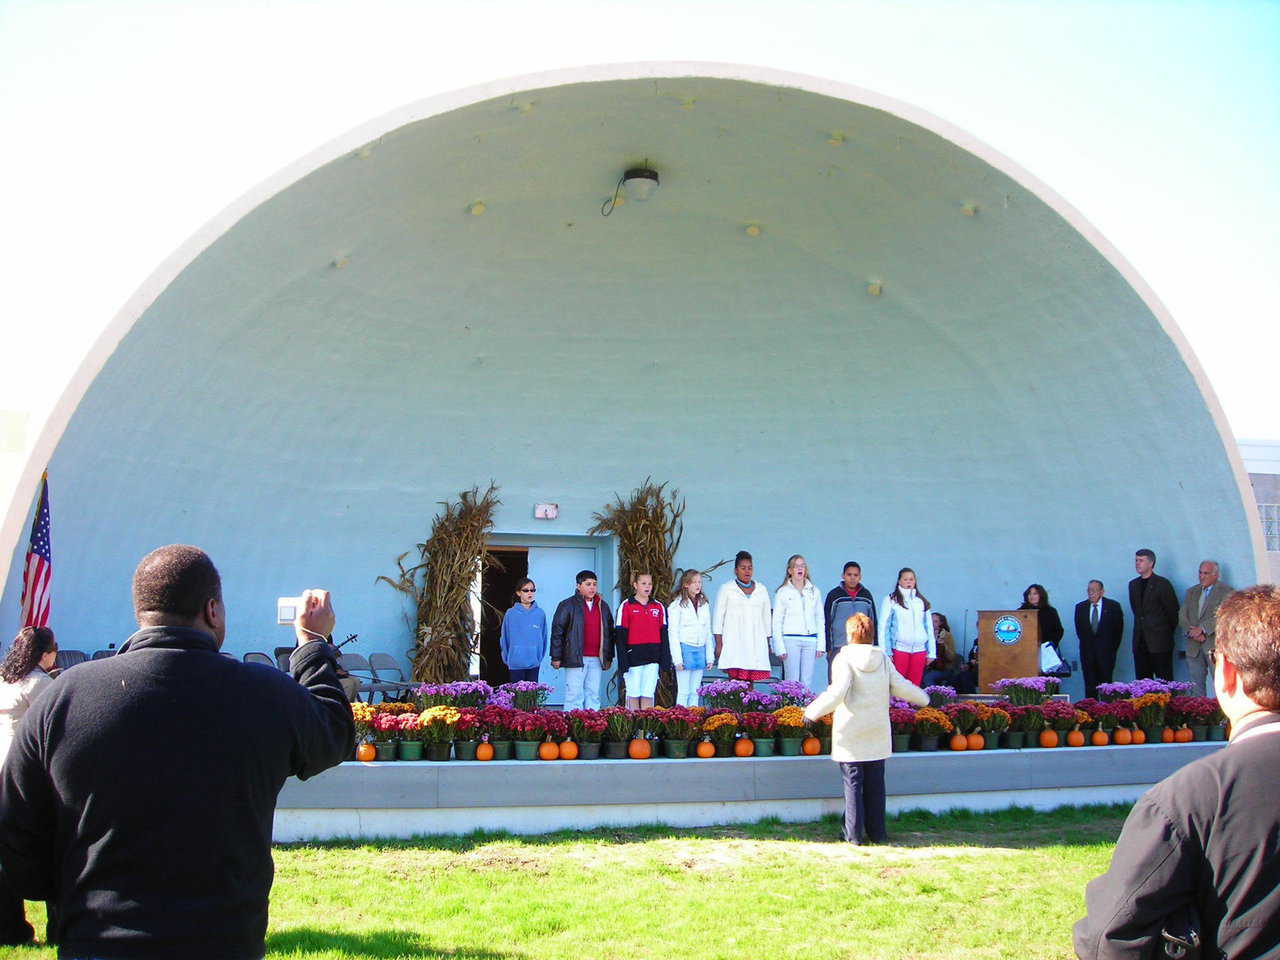 Monolithic Ecoshell Bandshell: Shore Front Park, Patchogue, New York 2007